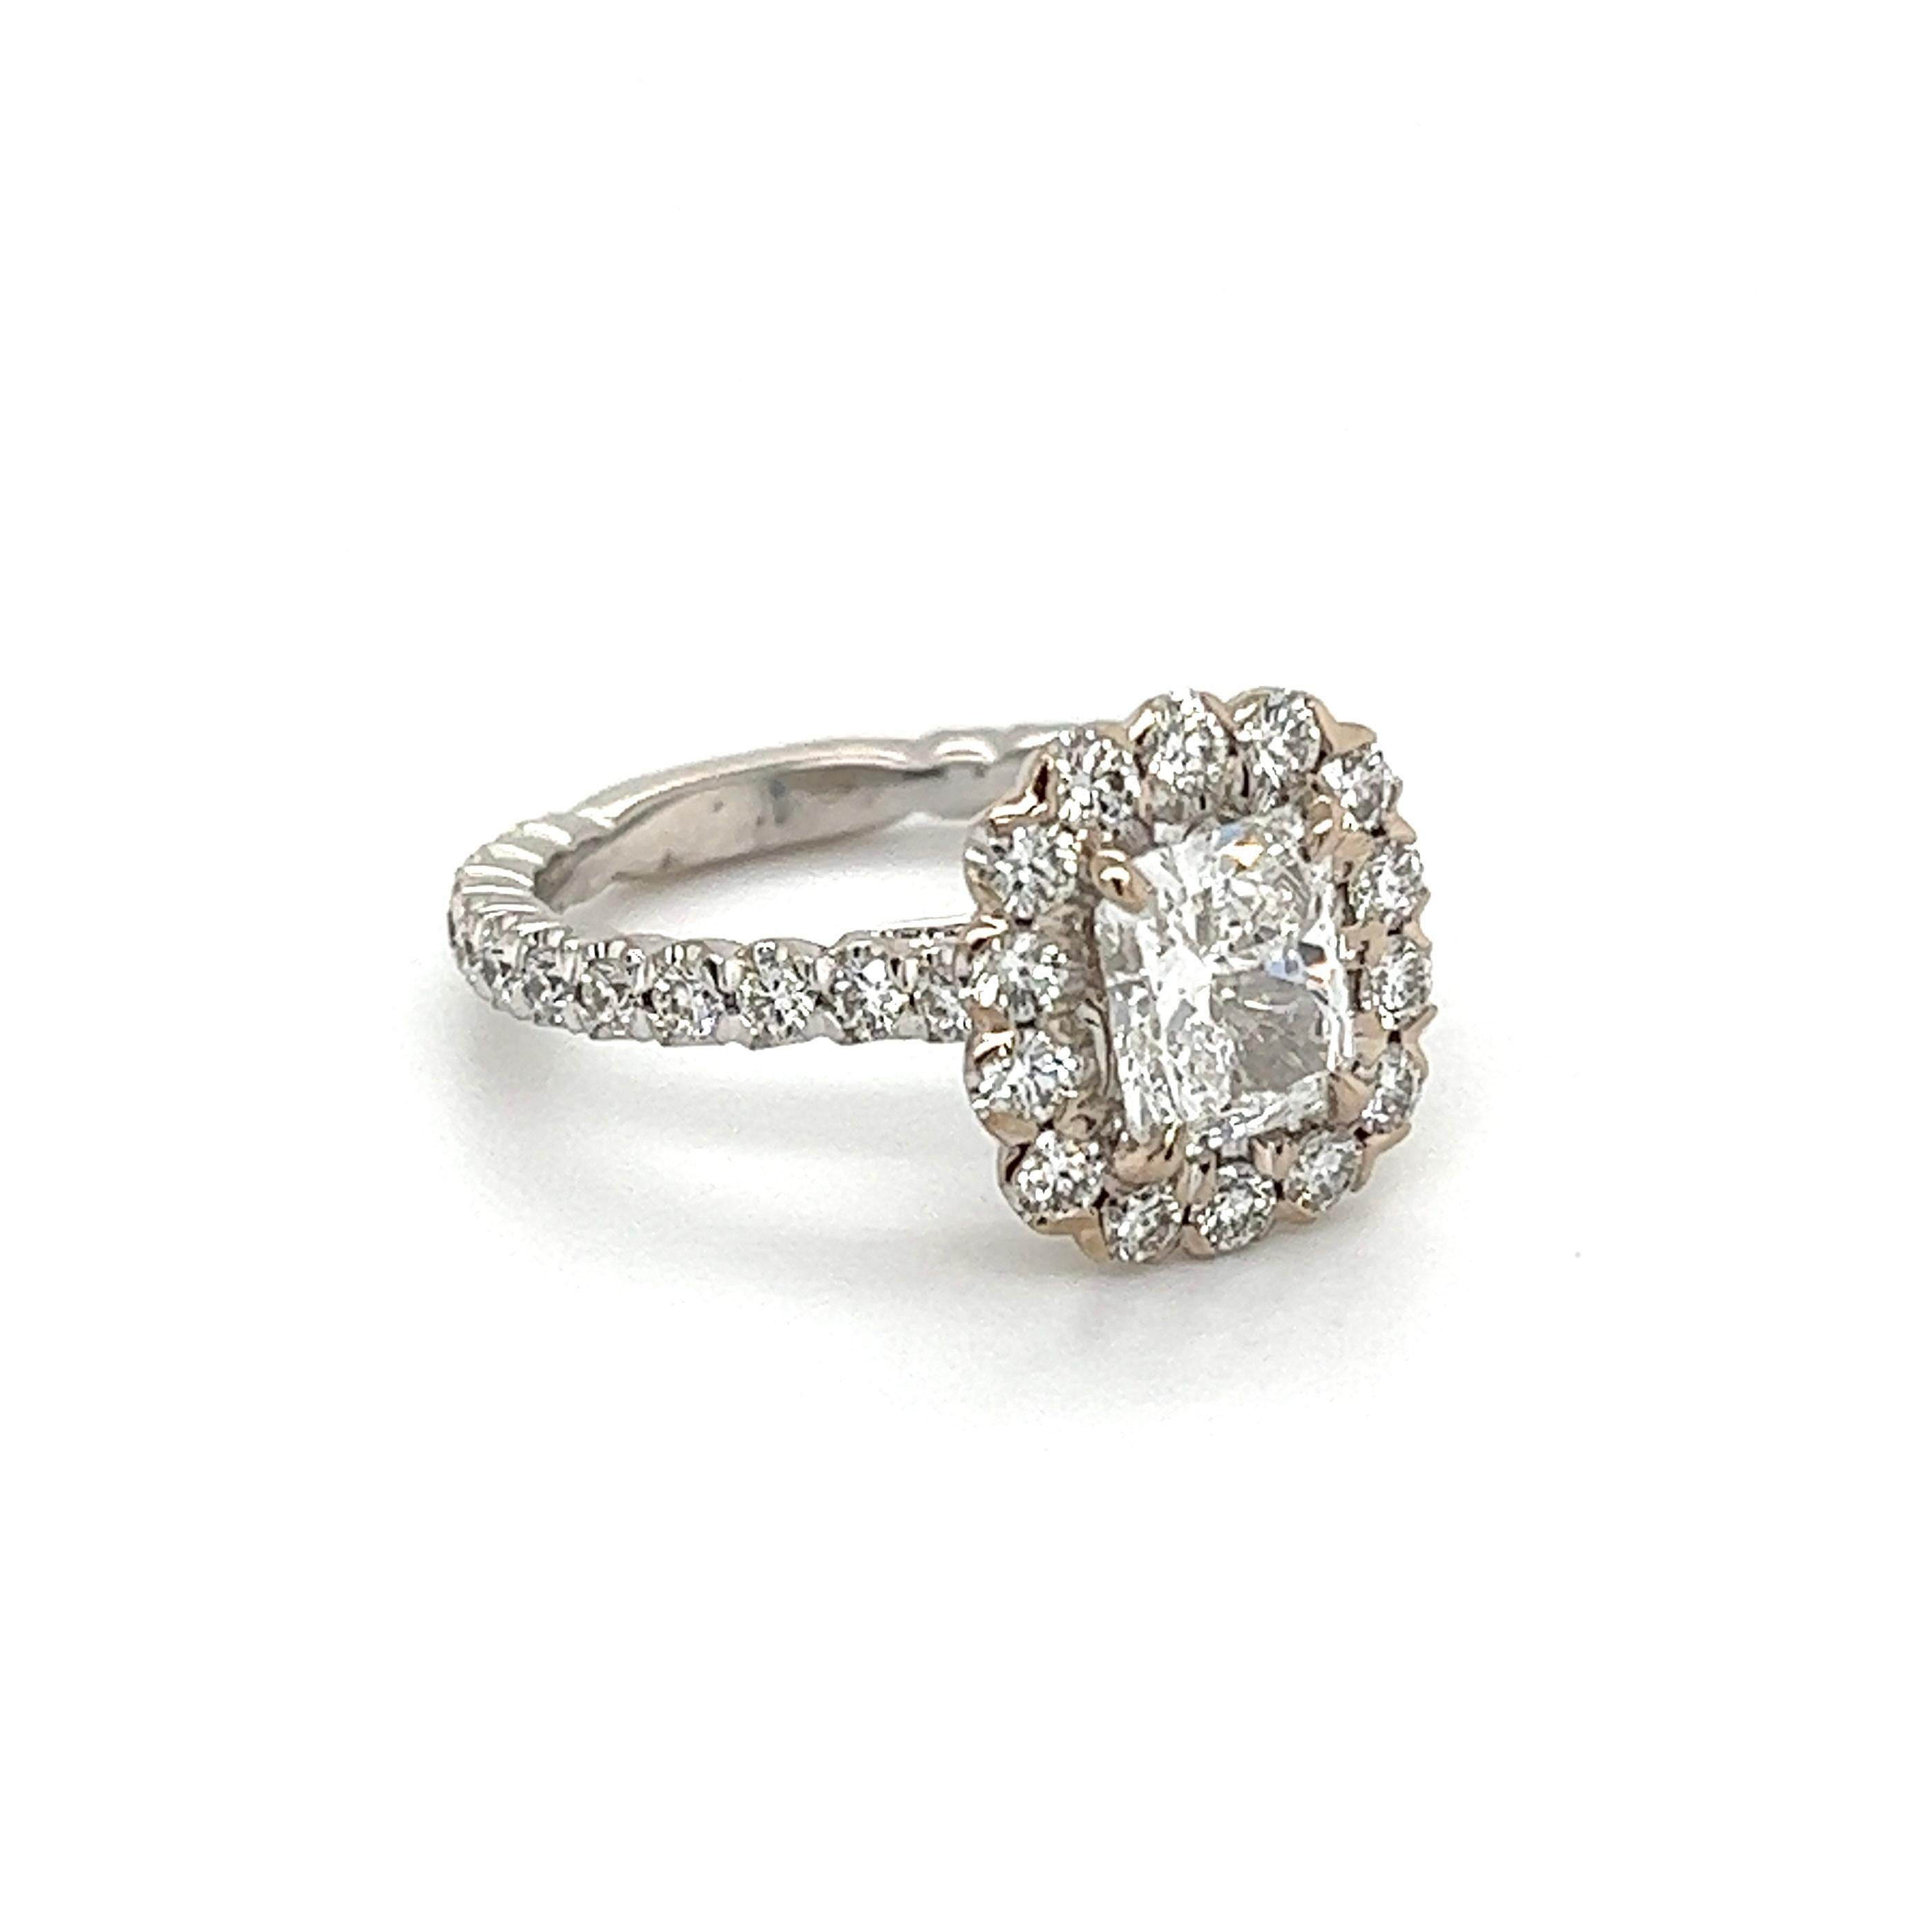 Simply Beautiful! Henry Daussi Radiant-Cut Diamond Platinum Art Deco Revival Cocktail Ring. Centering a securely nestled Hand set Radiant Cut Diamond, D-VVS1 GIA, surrounded by Diamonds, approx. 1.05tcw. Platinum Centering an Oval Sapphire weighing